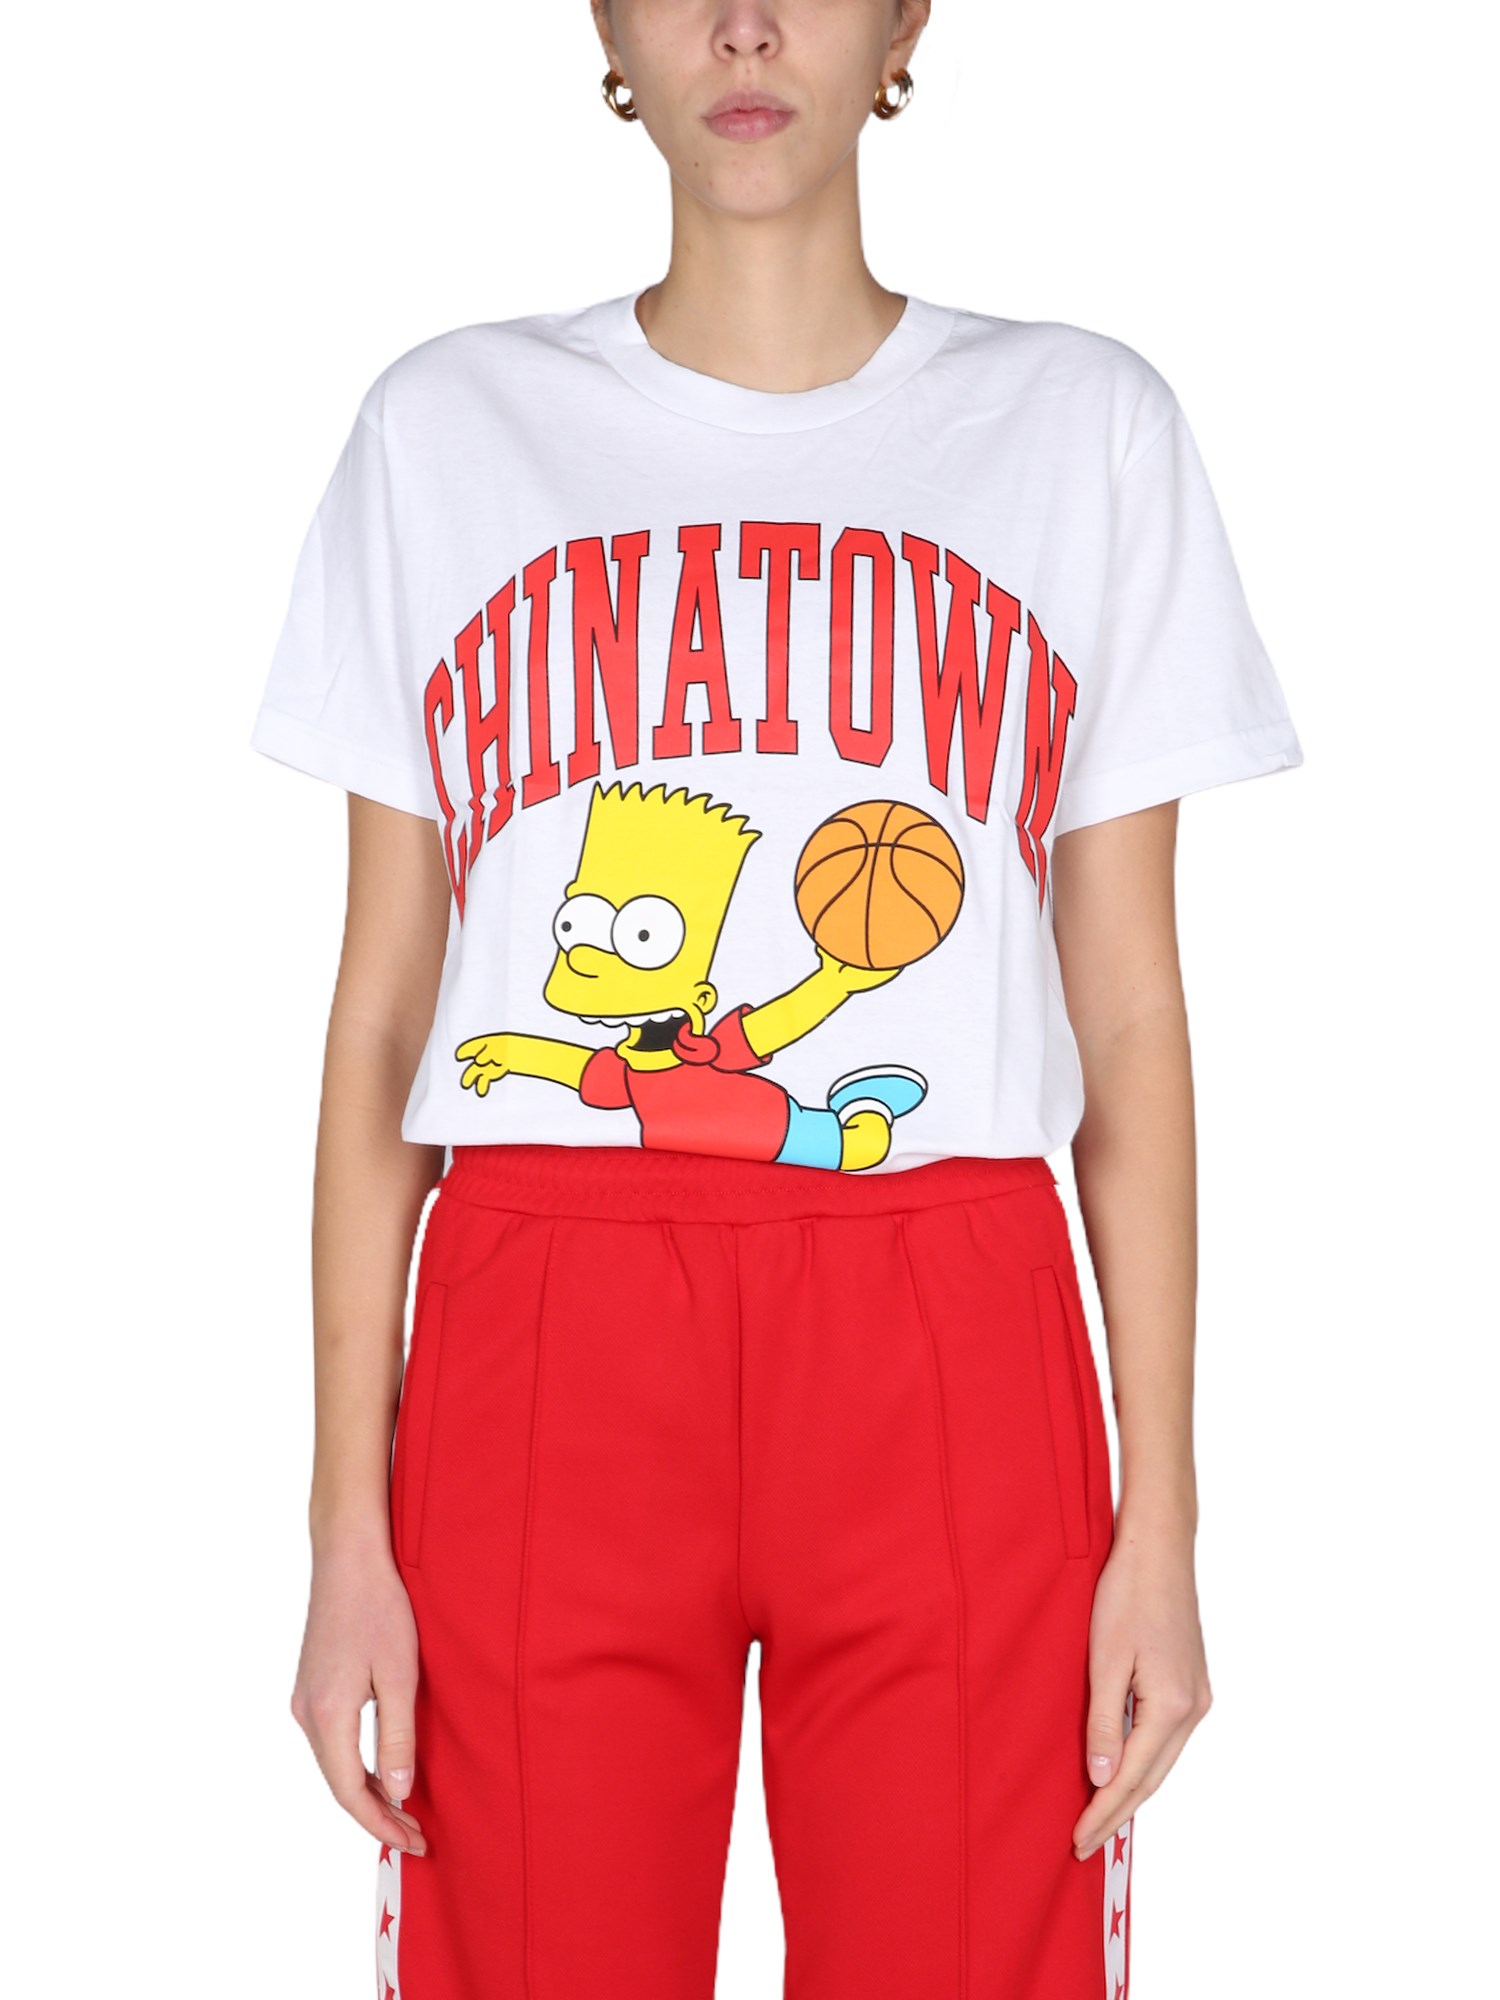 chinatown market x the simpsons "air bart" t-shirt